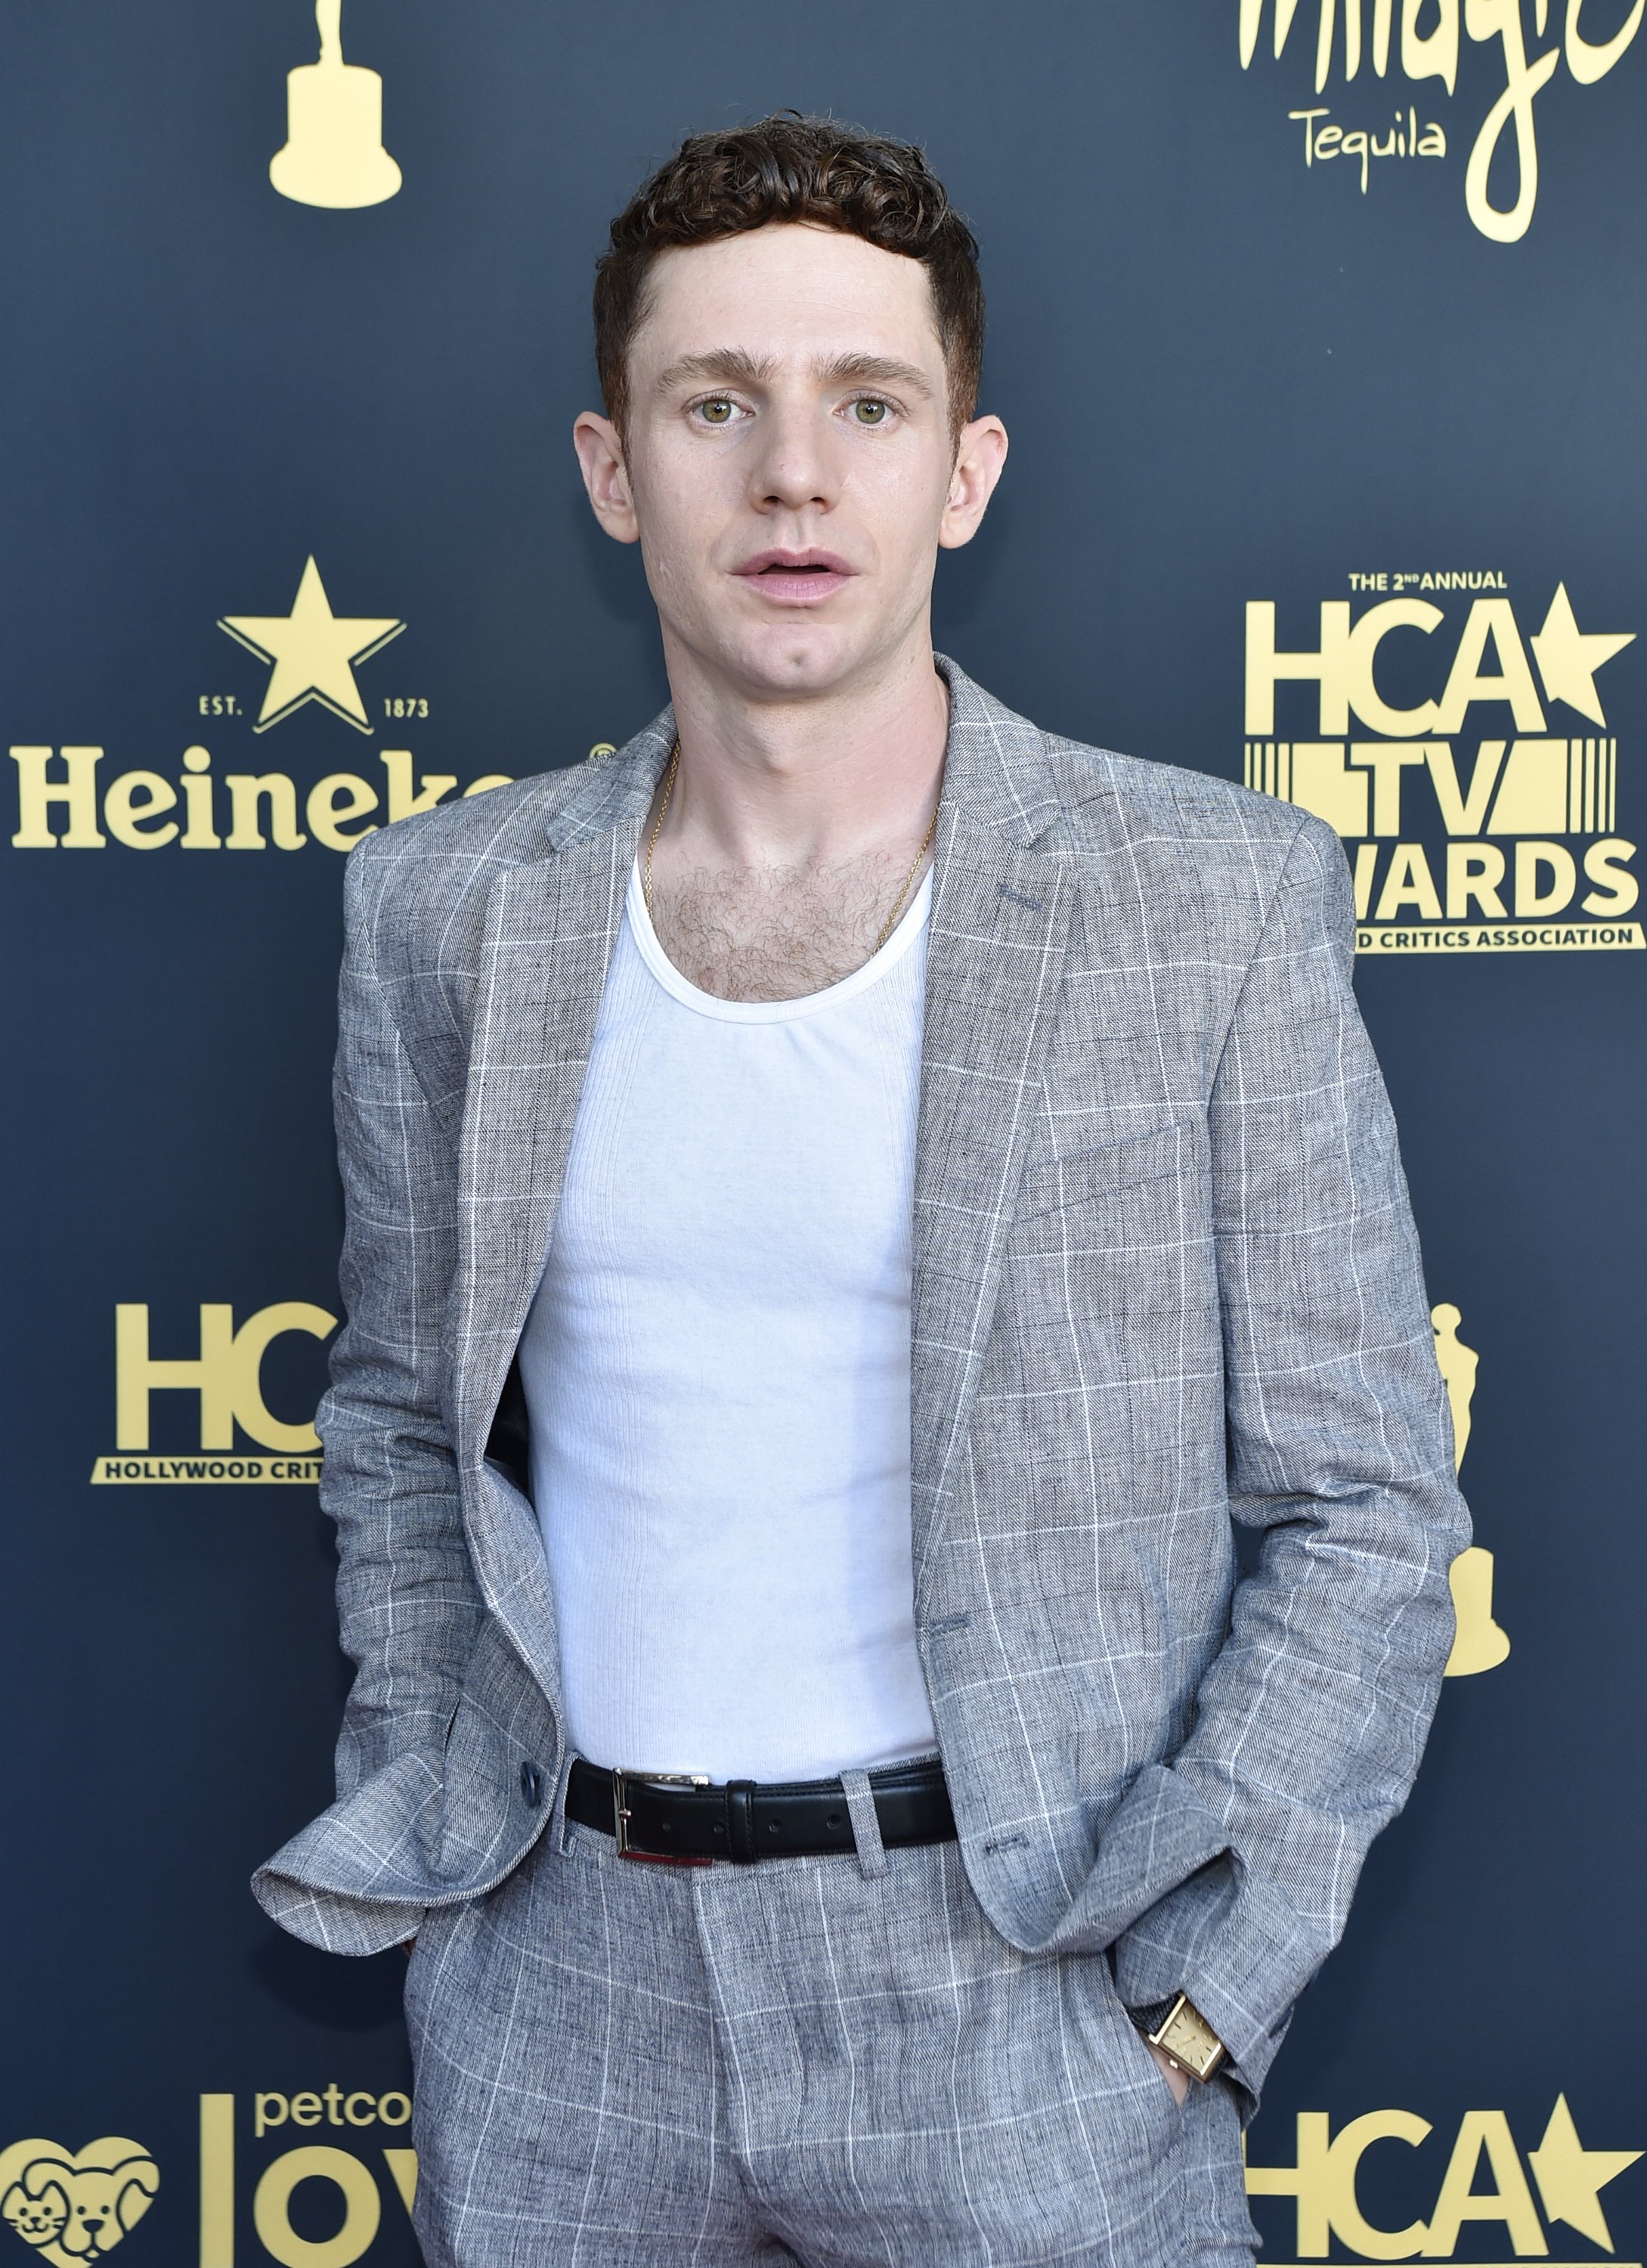 Chris Perfetti at the 2nd Annual HCA TV Awards on August 13, 2022, in Beverly Hills, California. | Source: Getty Images